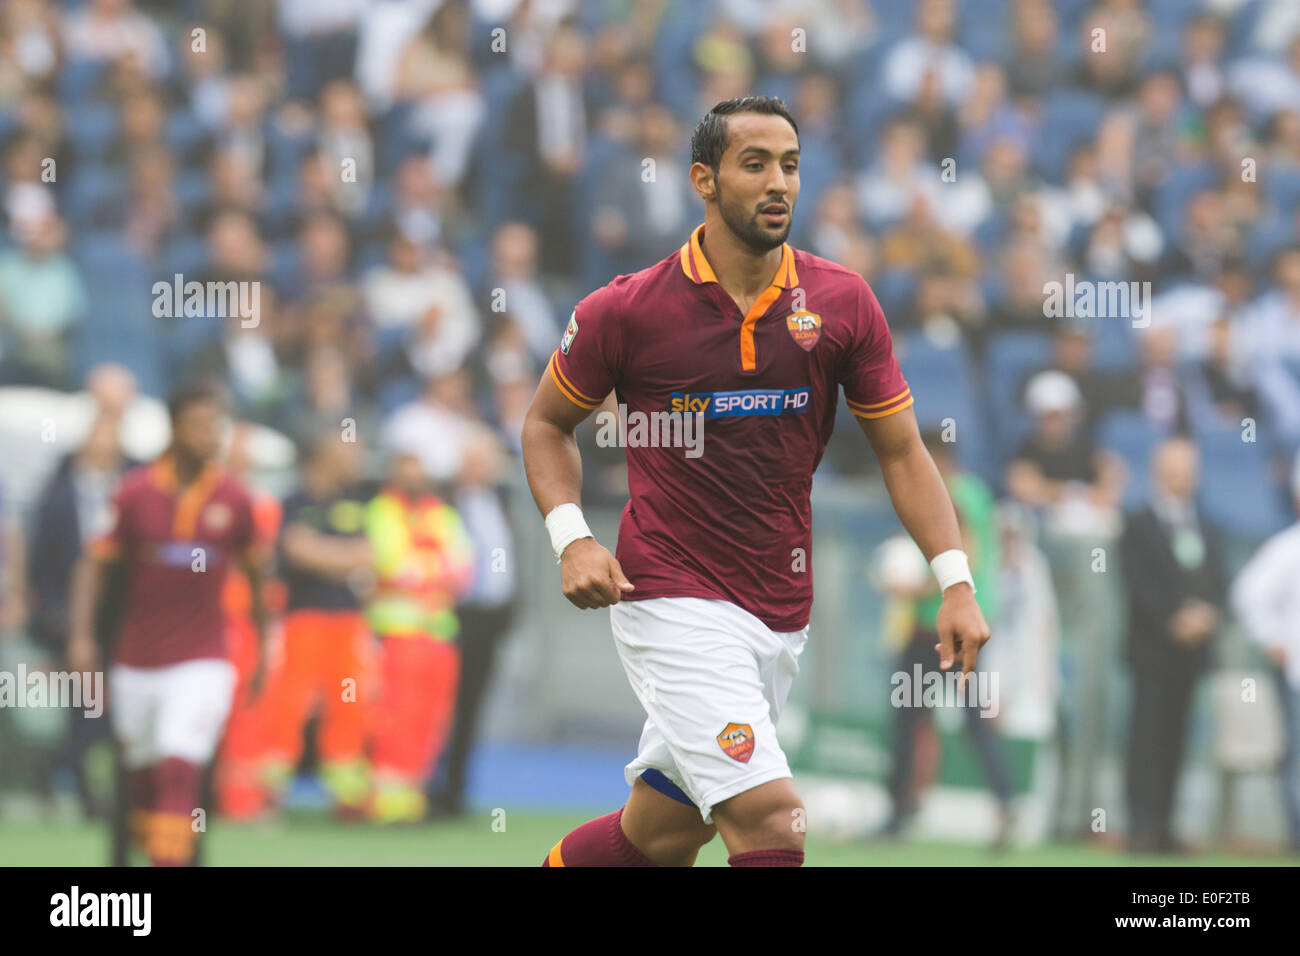 Rome, Italy. 11th May, 2014. Benatia of AS Roma during the Serie A match between AS Roma and FC Juventus on May 11, 2014, at Rome's Olympic Stadium. Credit:  Manuel Romano/NurPhoto/ZUMAPRESS.com/Alamy Live News Stock Photo